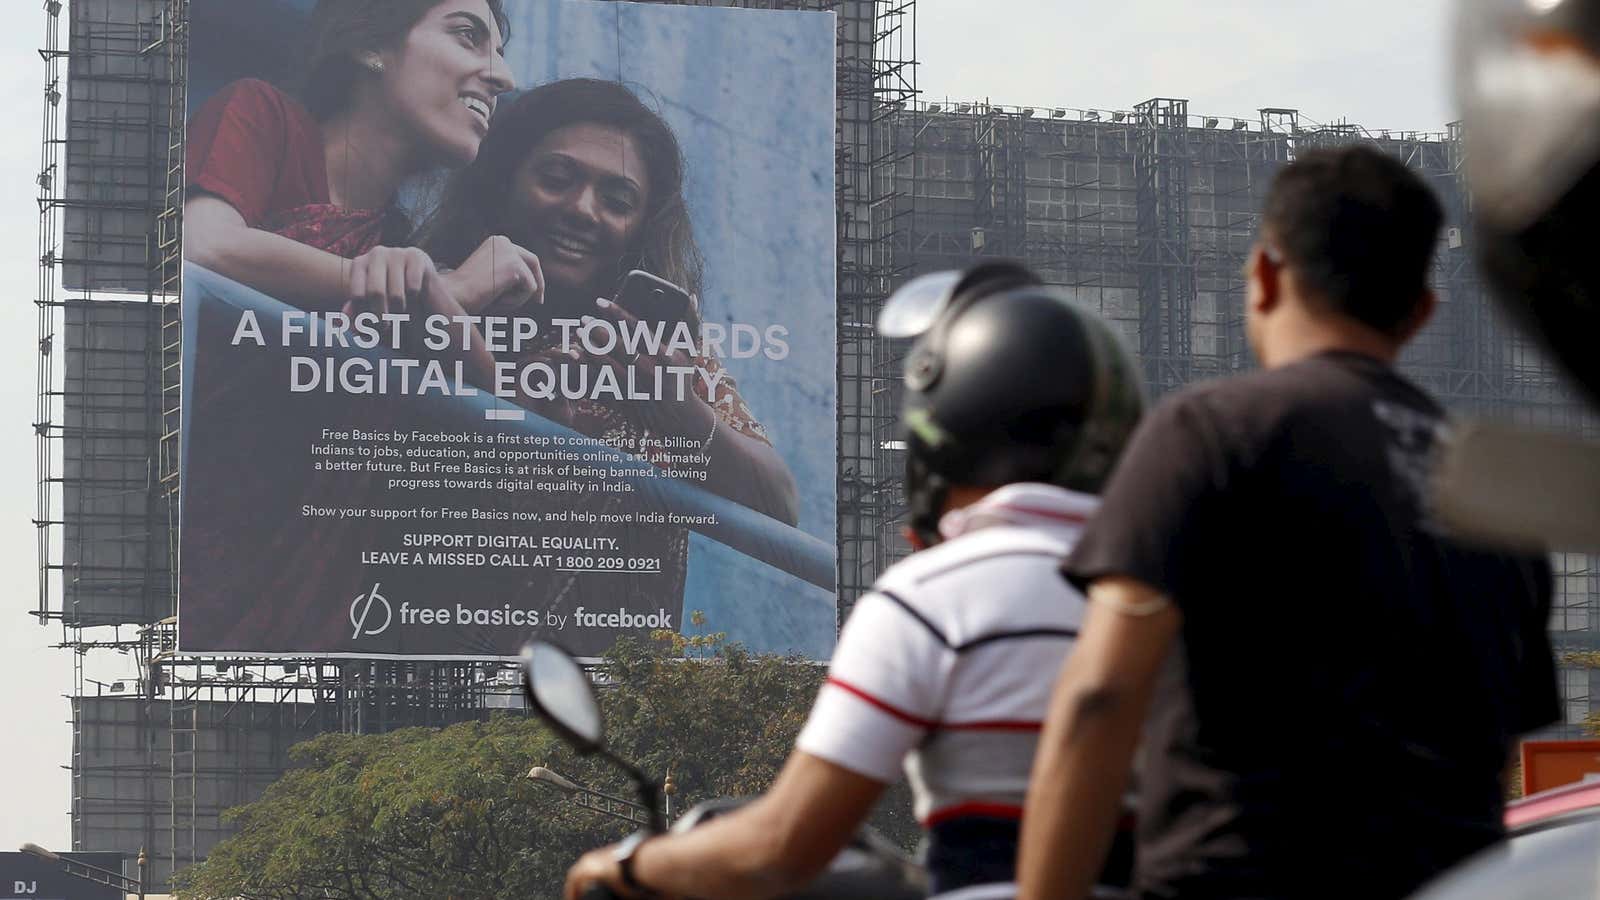 Unlike India, not everyone has a problem with Free Basics.